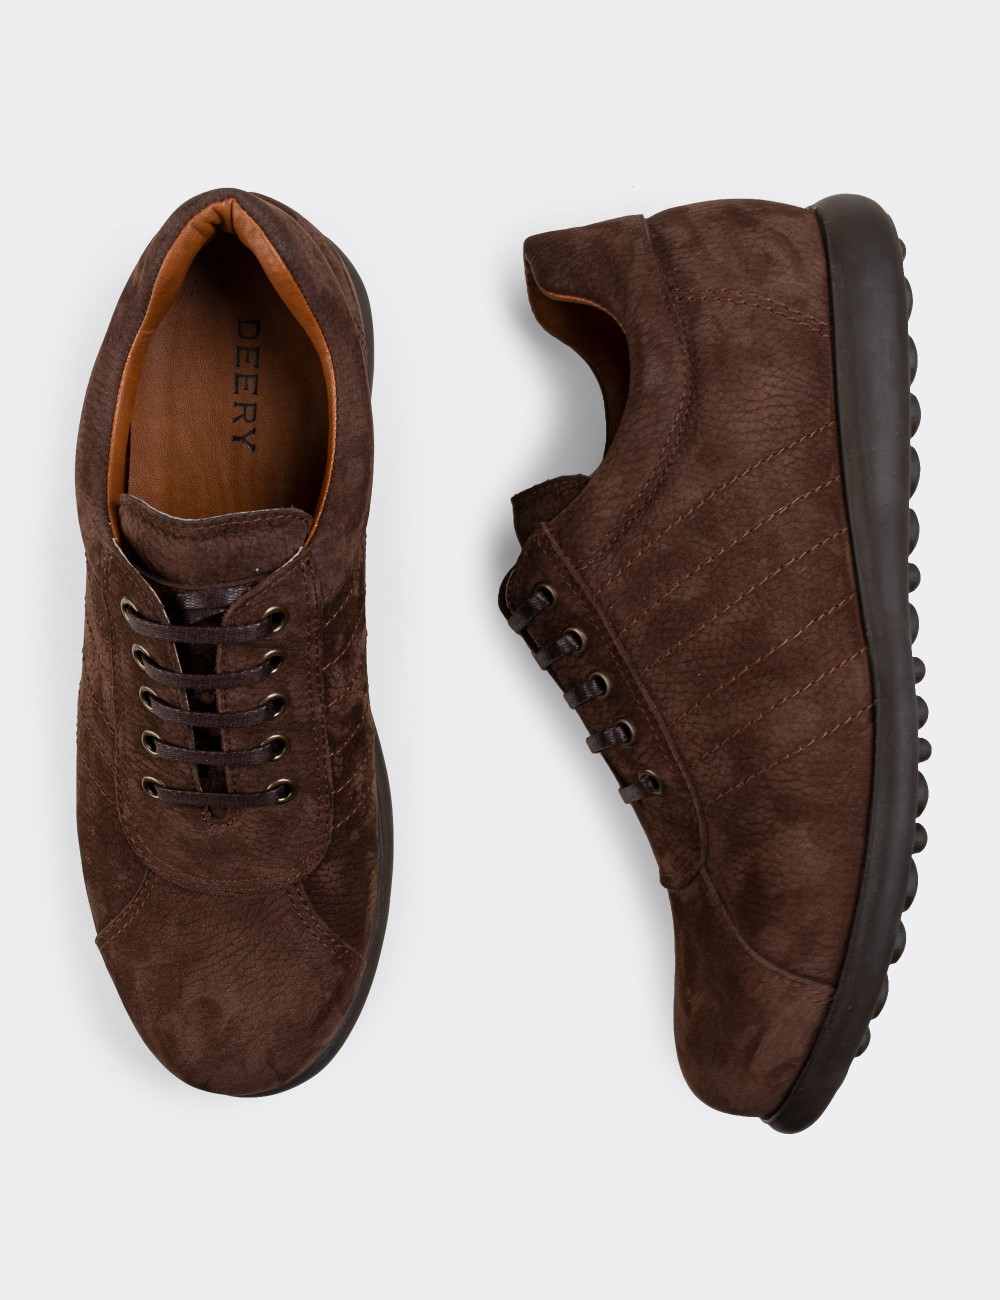 Brown Nubuck Leather Lace-up Shoes - 01828MKHVC01